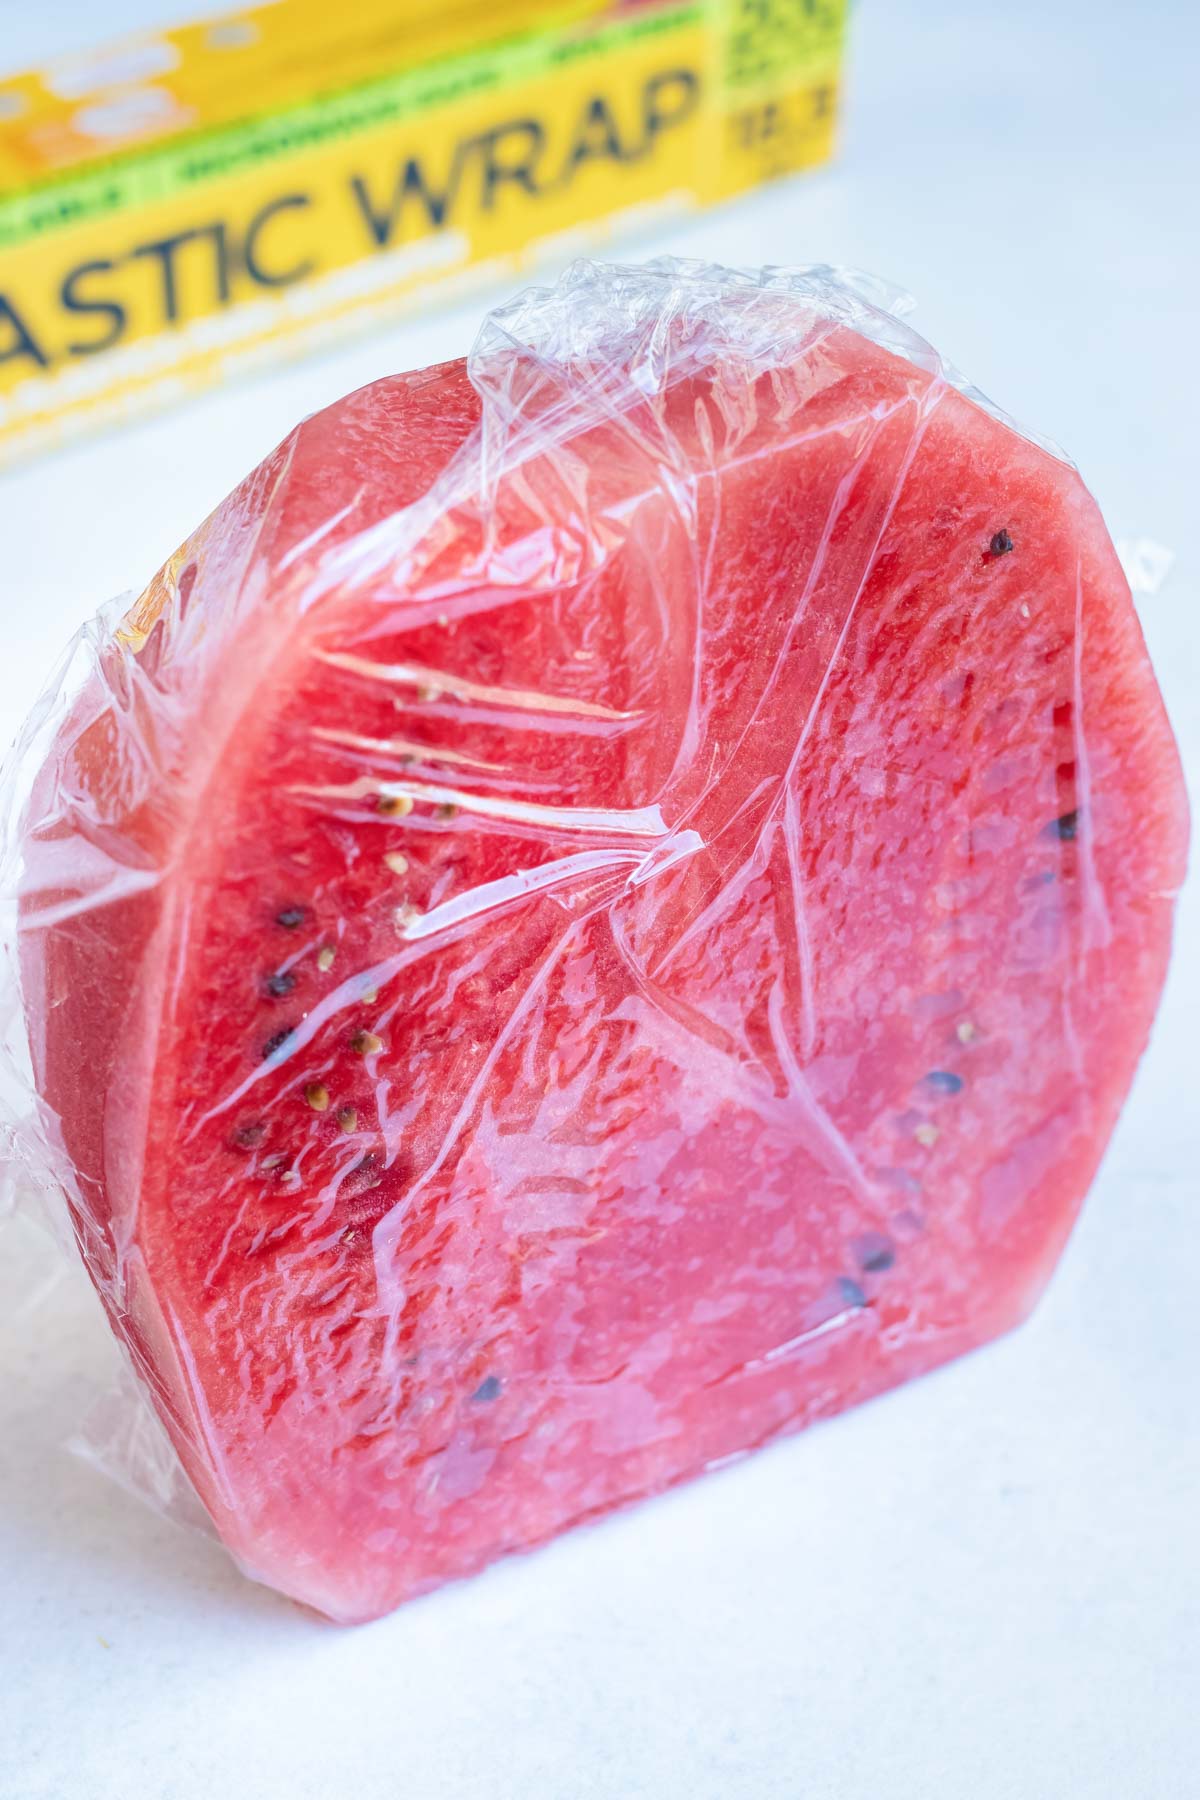 Half of a watermelon wrapped in plastic wrap to be stored in the refrigerator.